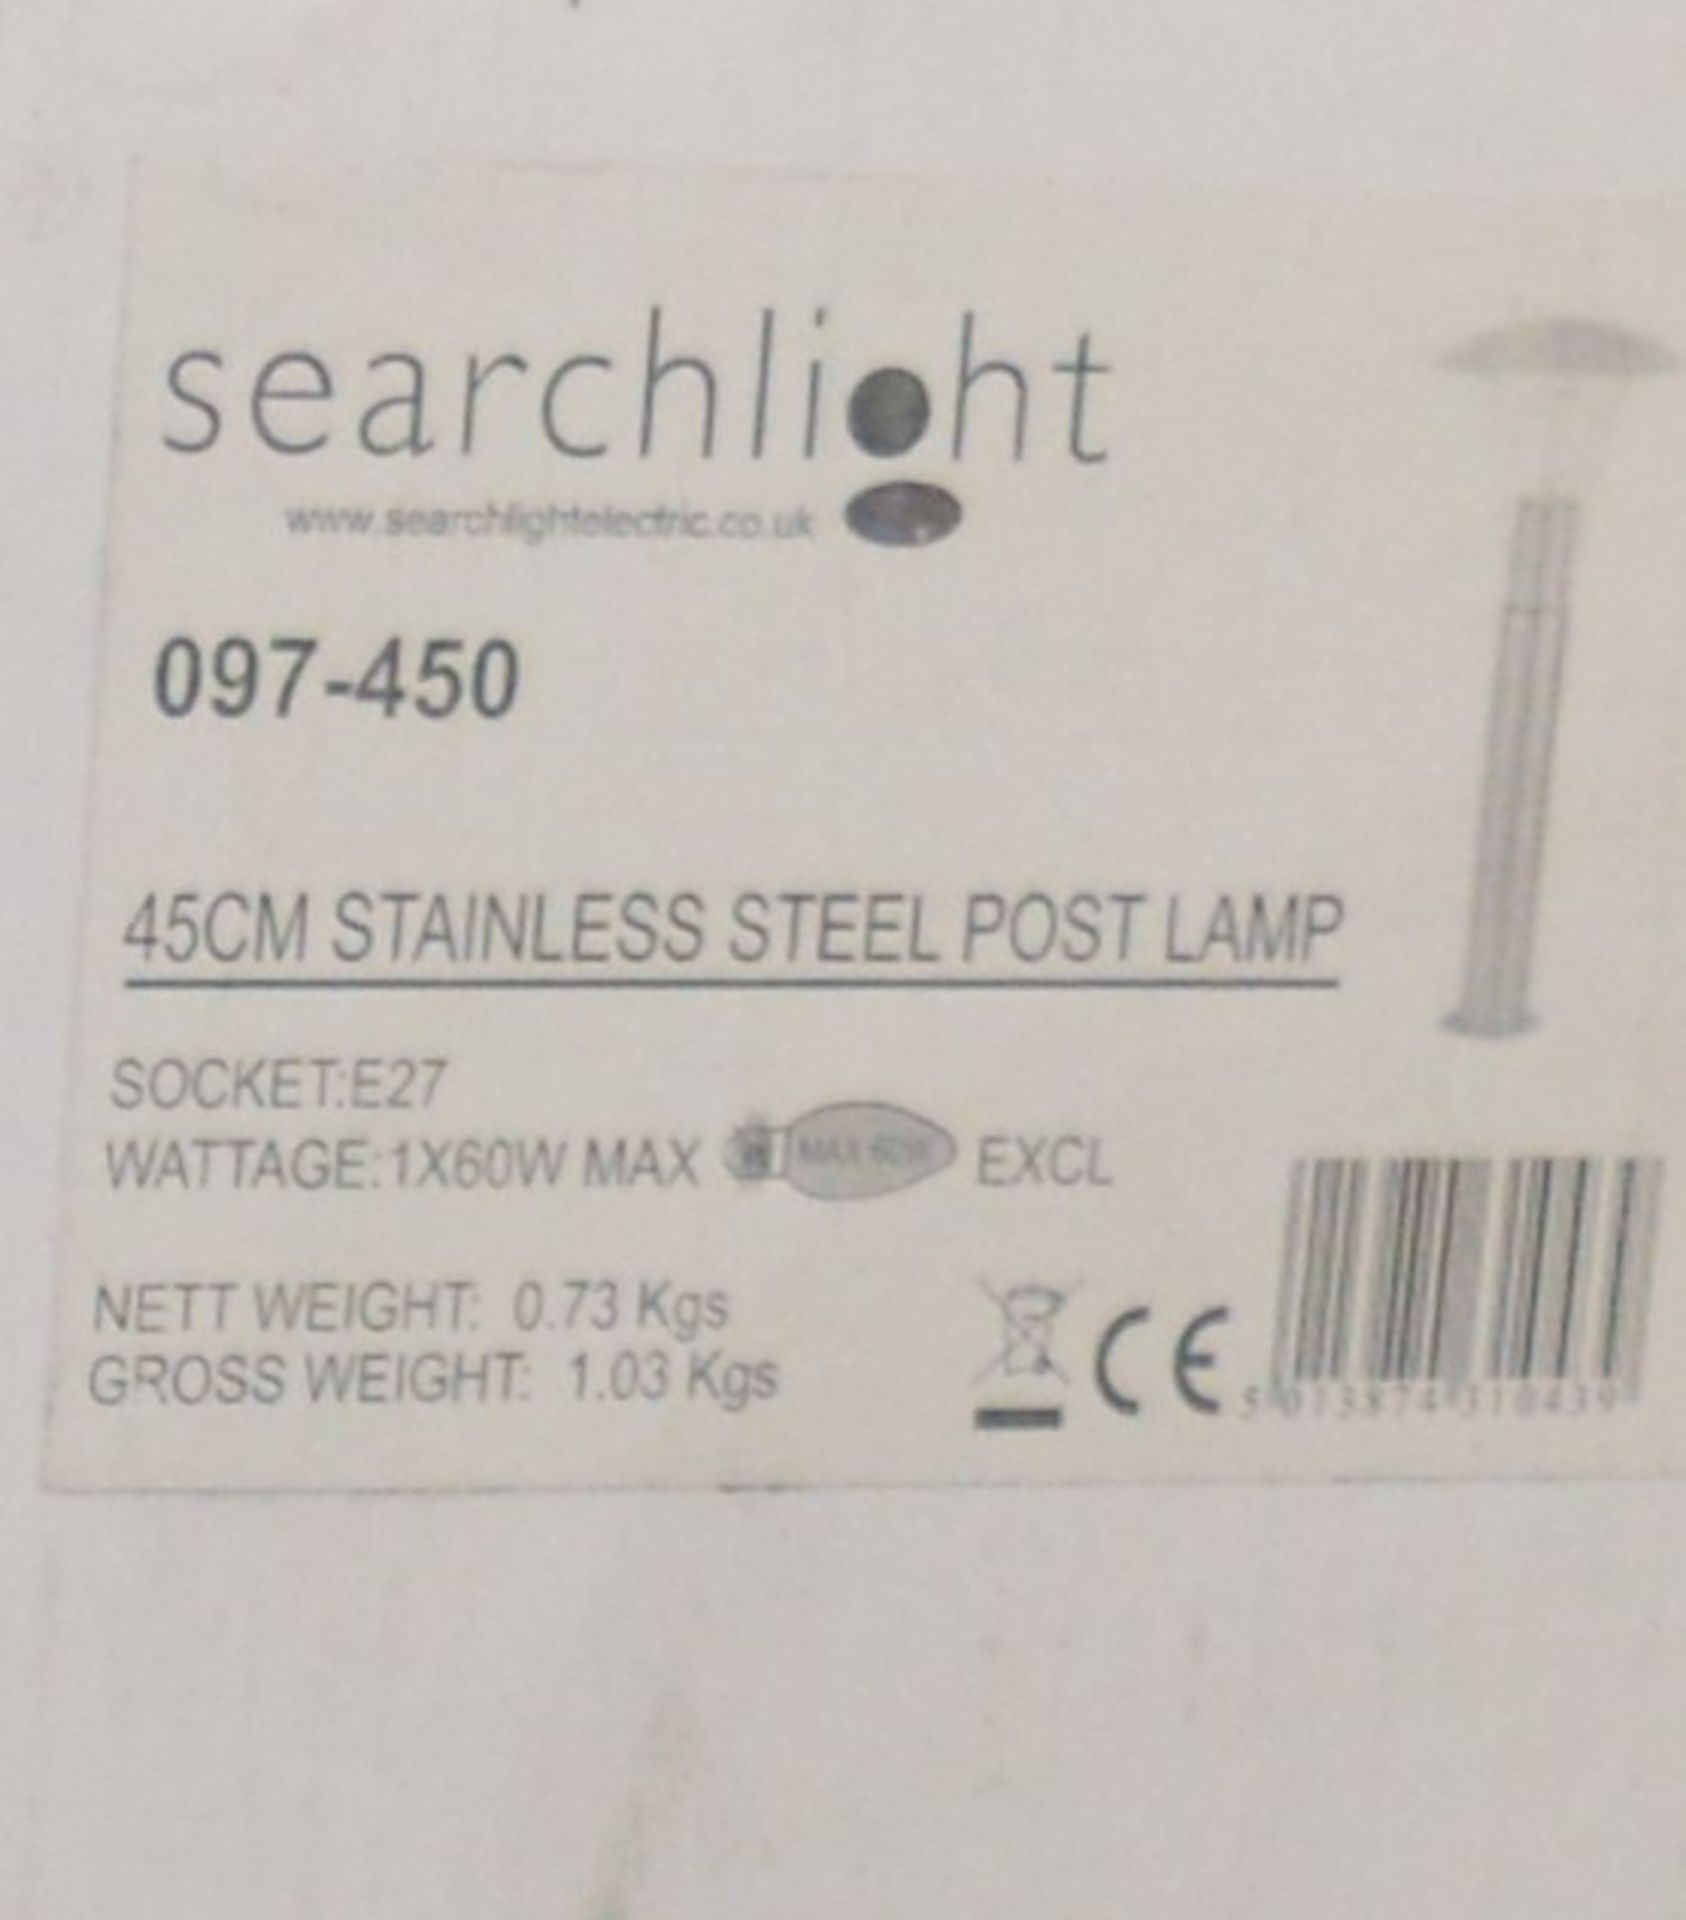 5 x Searchlight 097-450 Stainless Steel Post Lamp - IP44 Rated - Ideal For Gardens, Driveways or